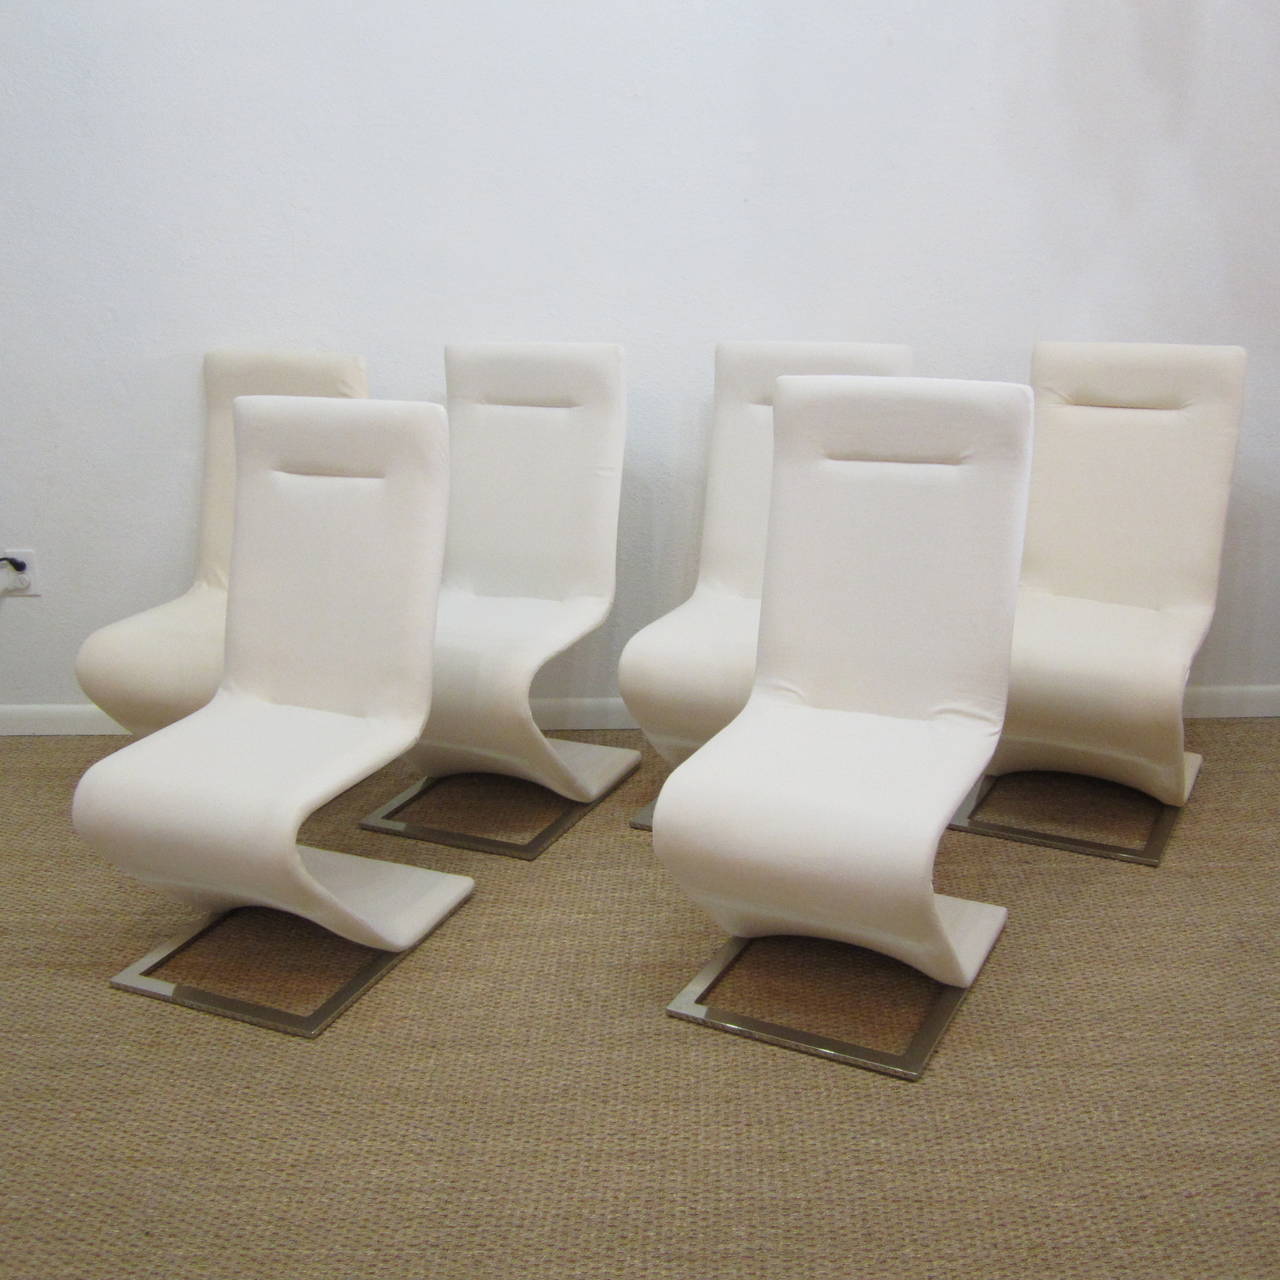 Original elegant cantilevered dining, office or side chairs on solid and weighty polished steel frames. Chairs have a perfect back and forth sway to them, are a rare find, and have visible scuff wear to the fabric but are very solid and study steel